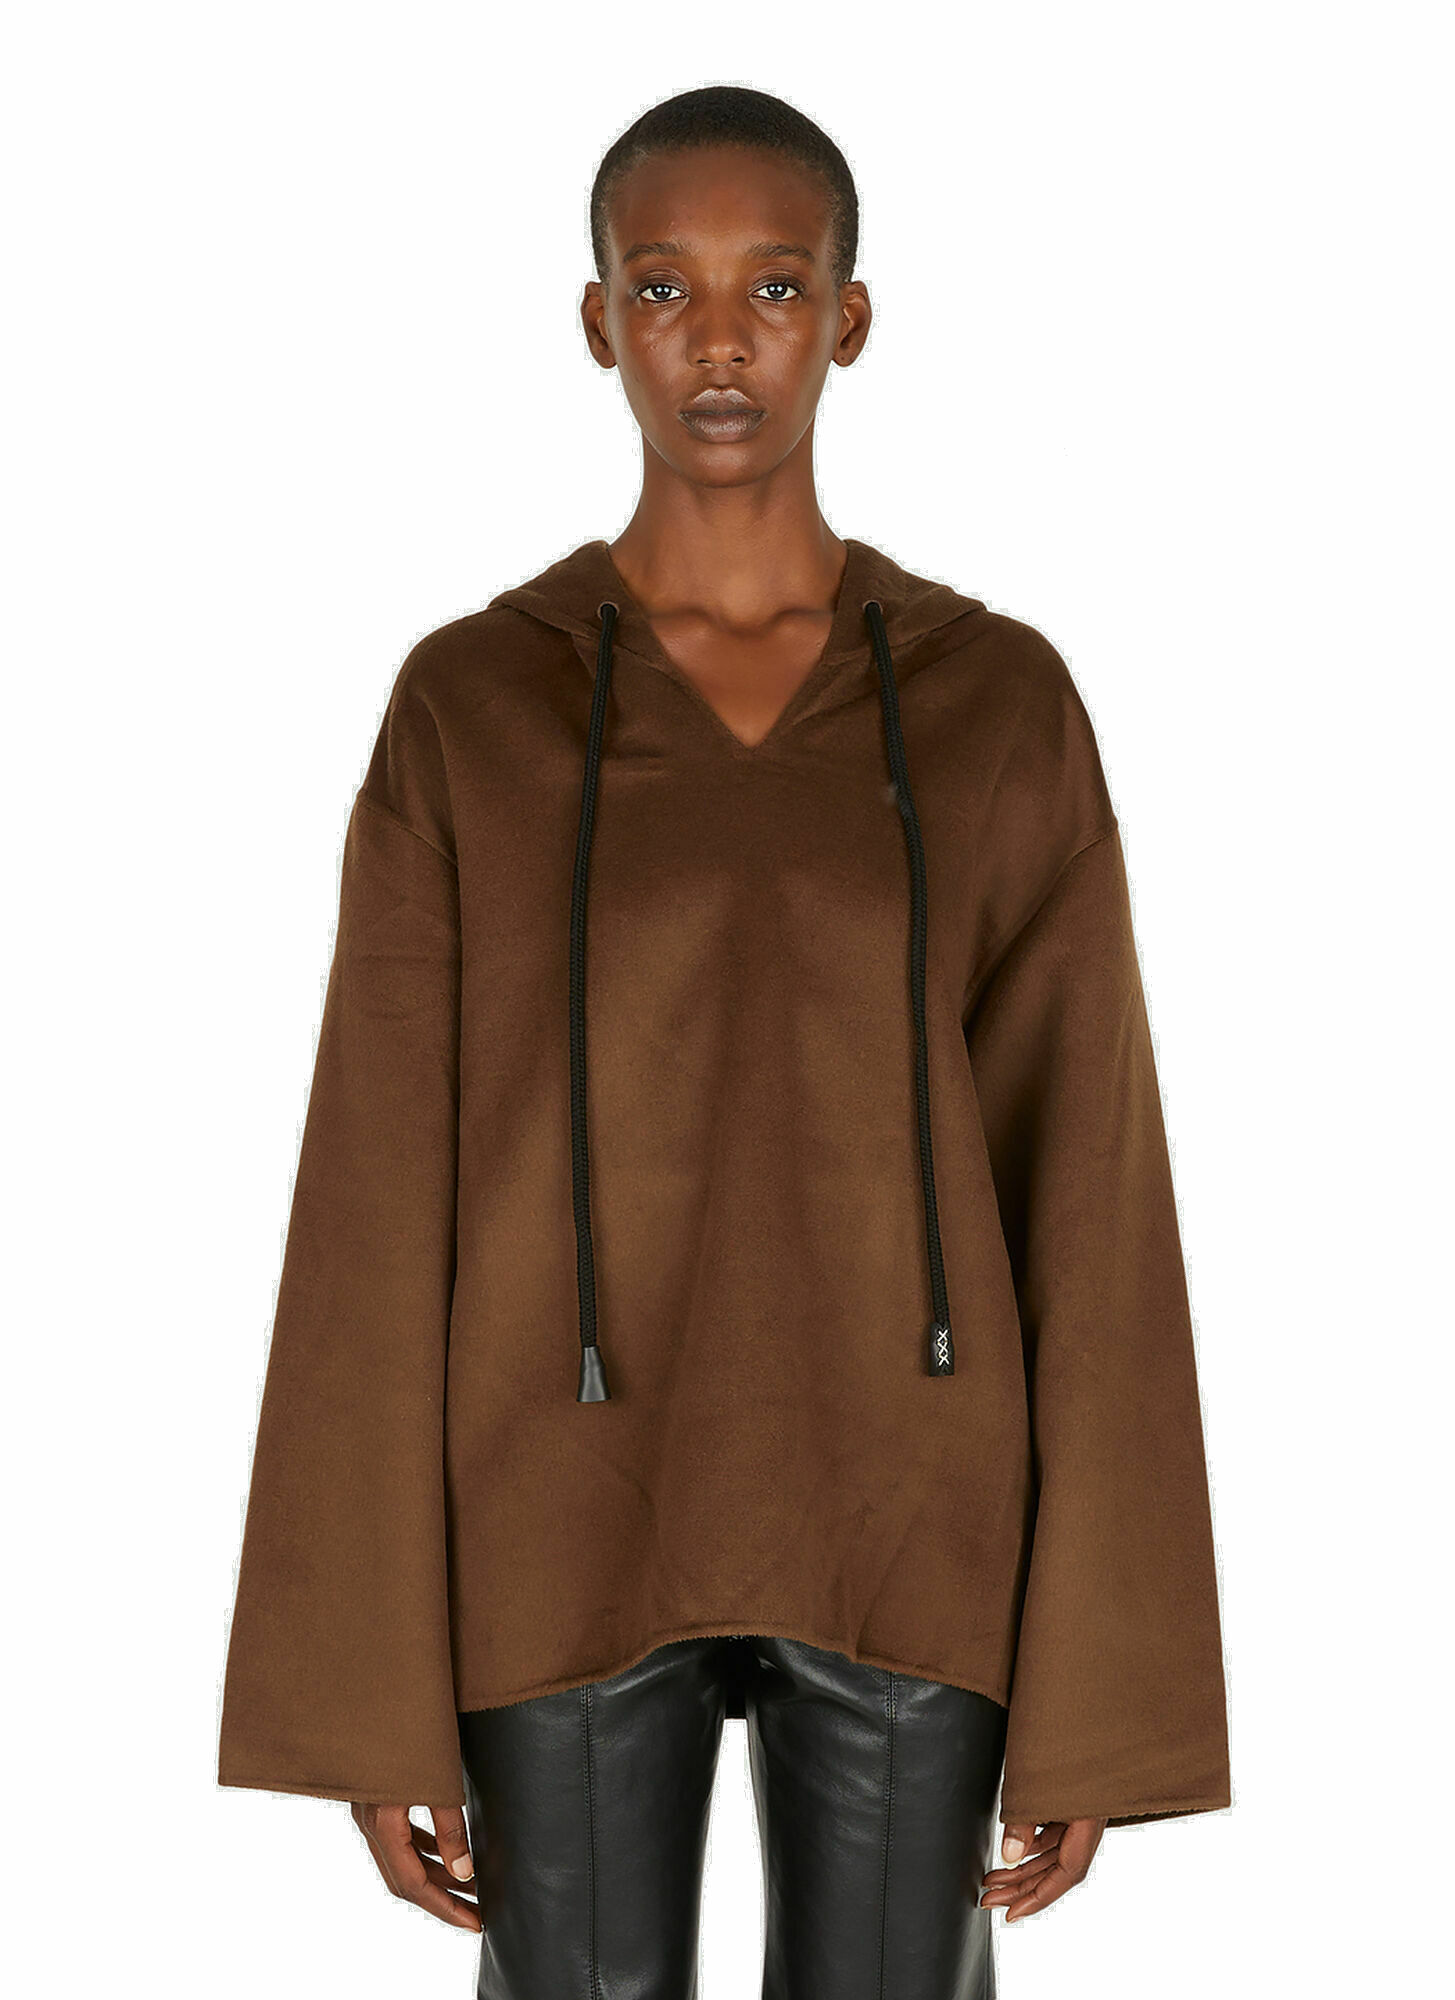 Photo: Moshe Hooded Sweater in Brown